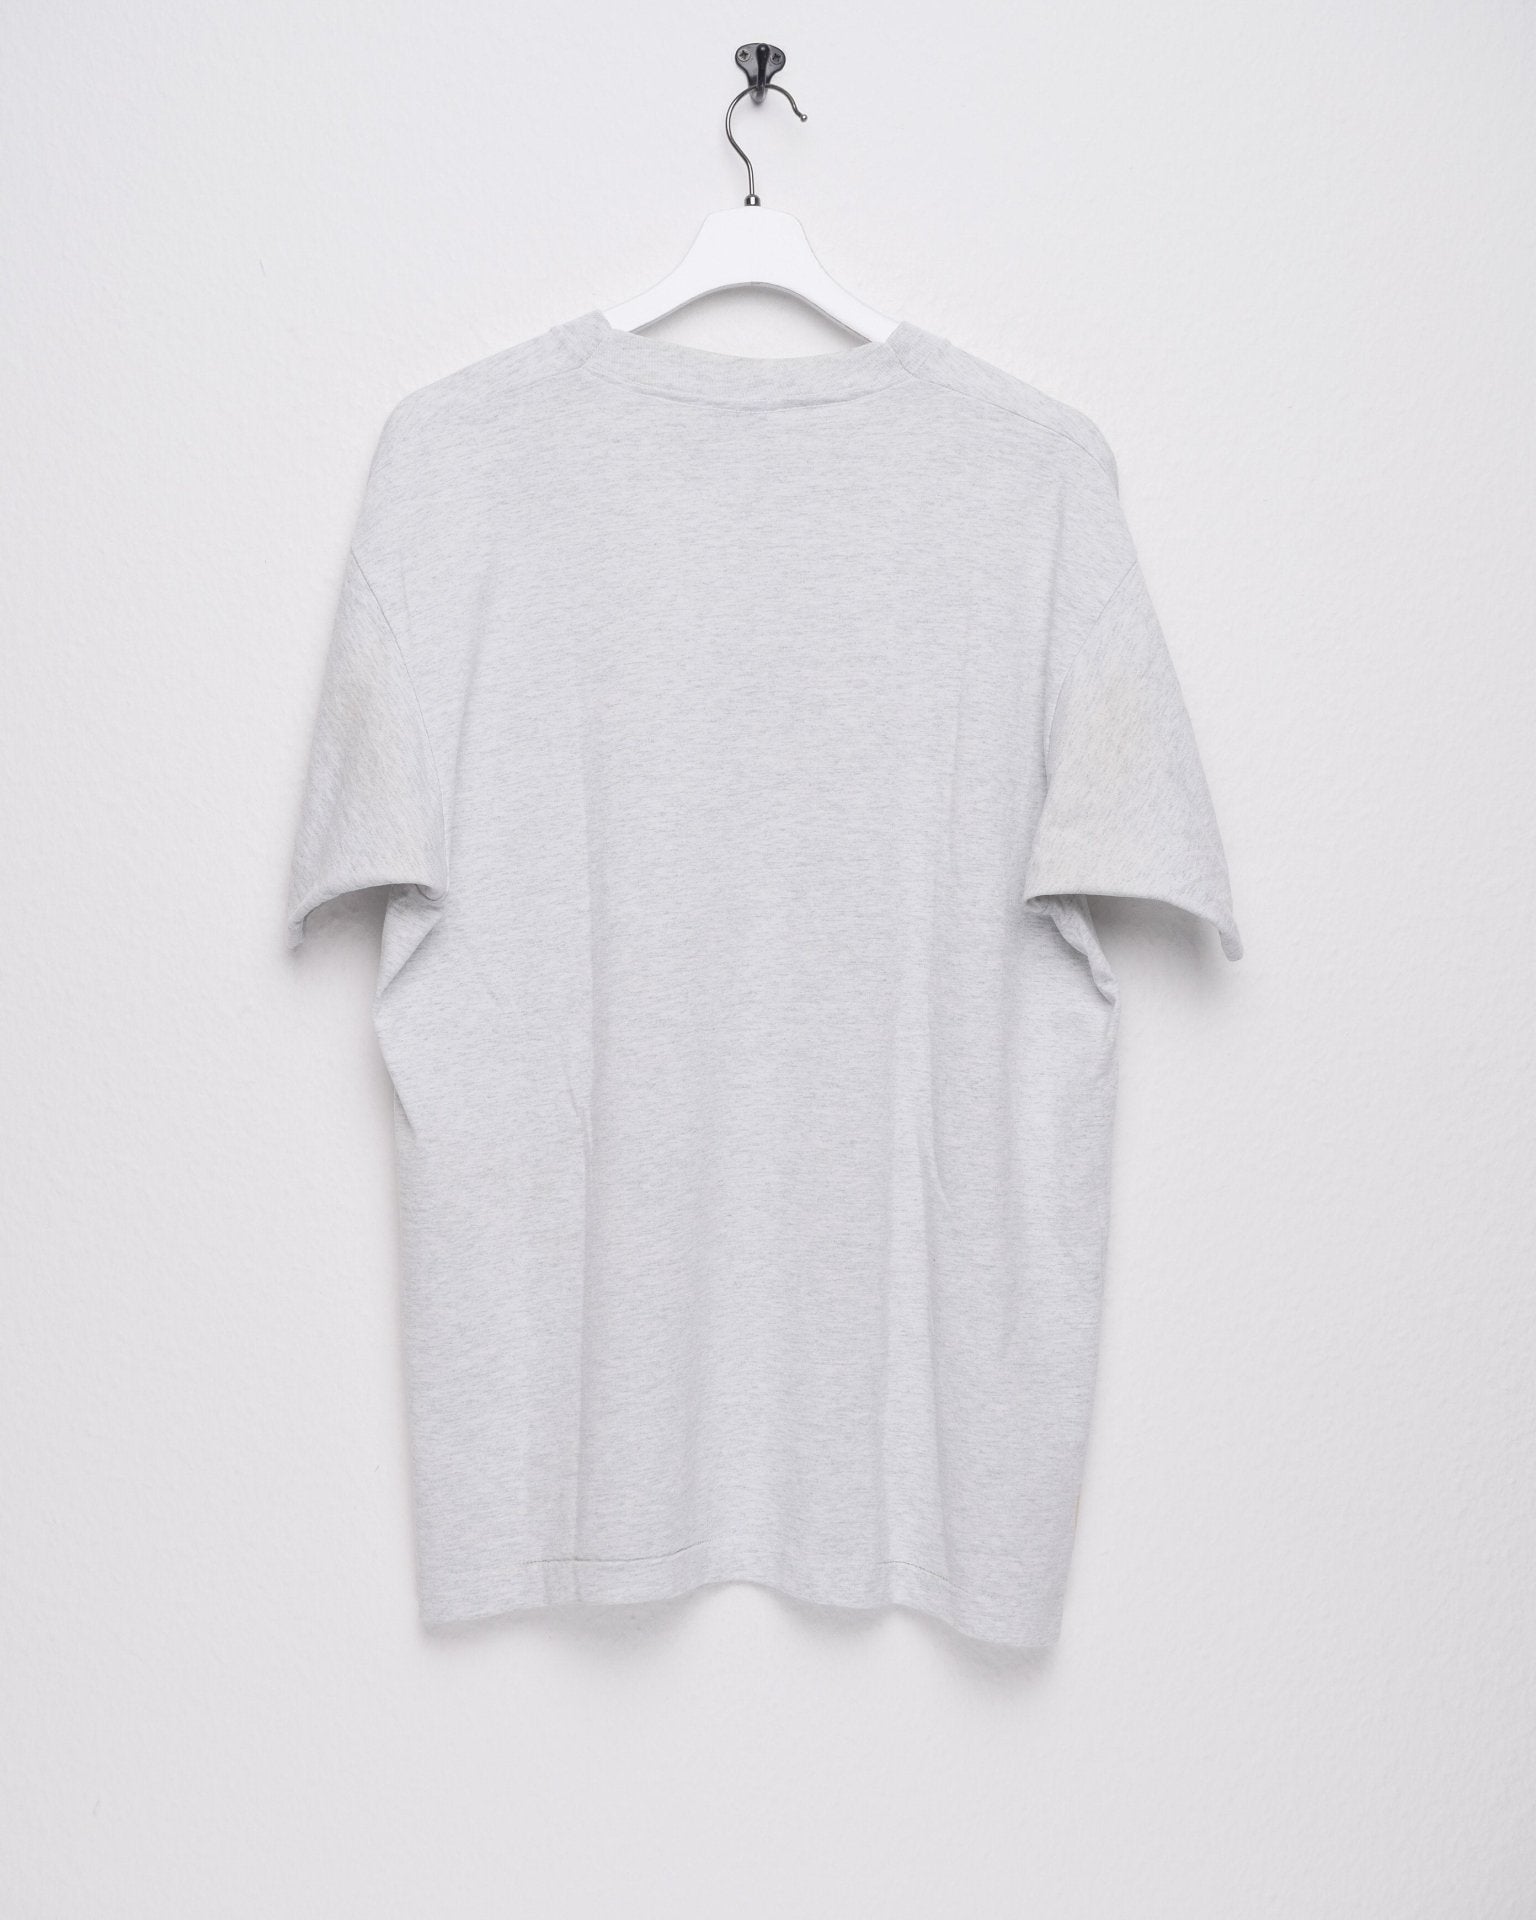 'Educate to Elevate' printed Spellout grey Shirt - Peeces